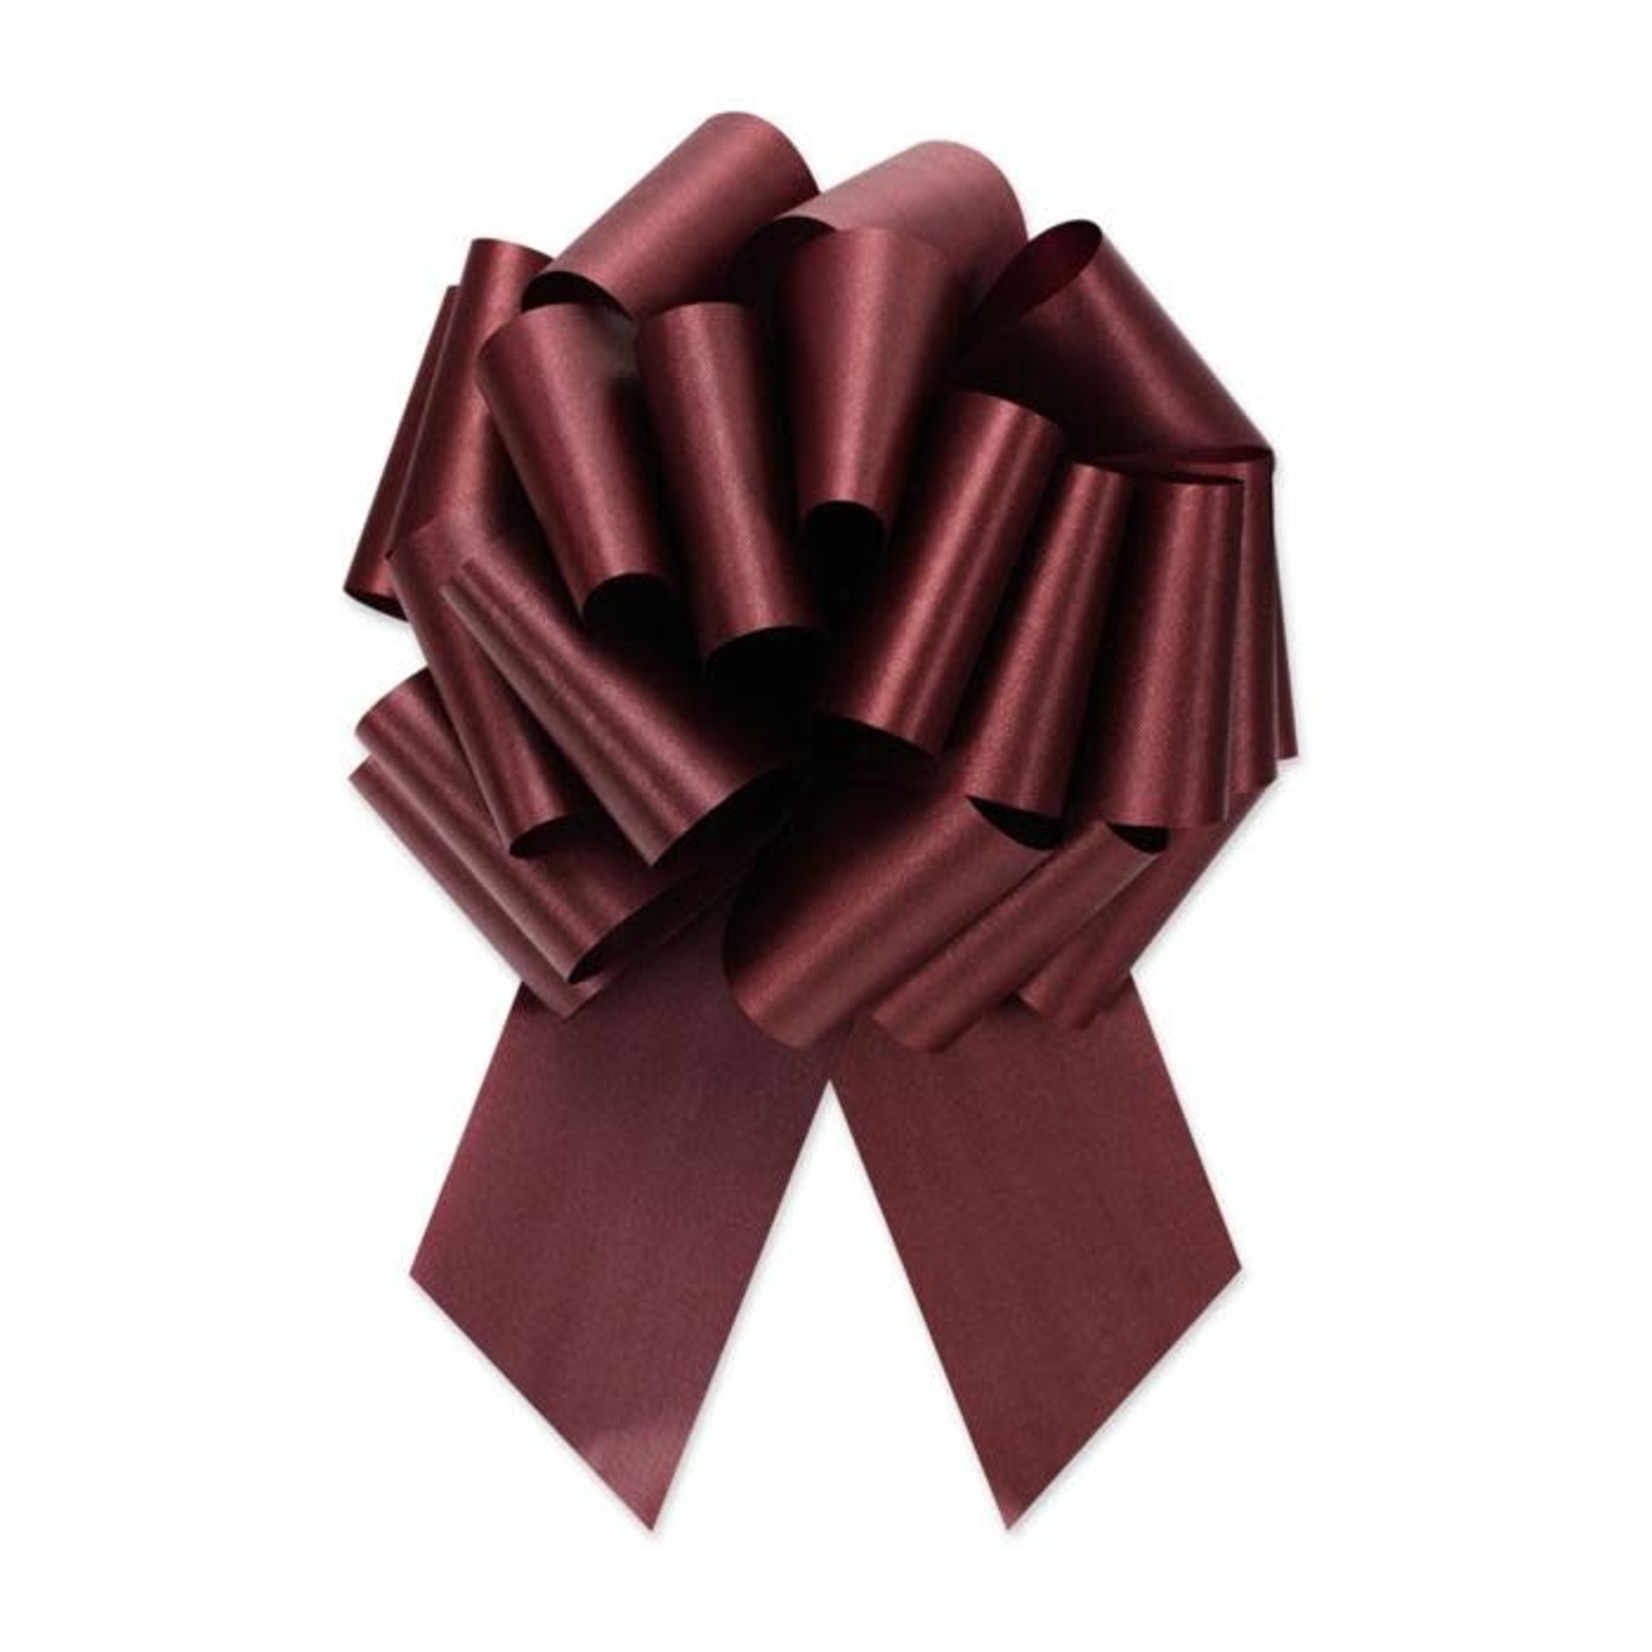 PERFECT BOW  #5 BURGUNDY, 7/8" ribbon width, 4" bow size, 18 loops